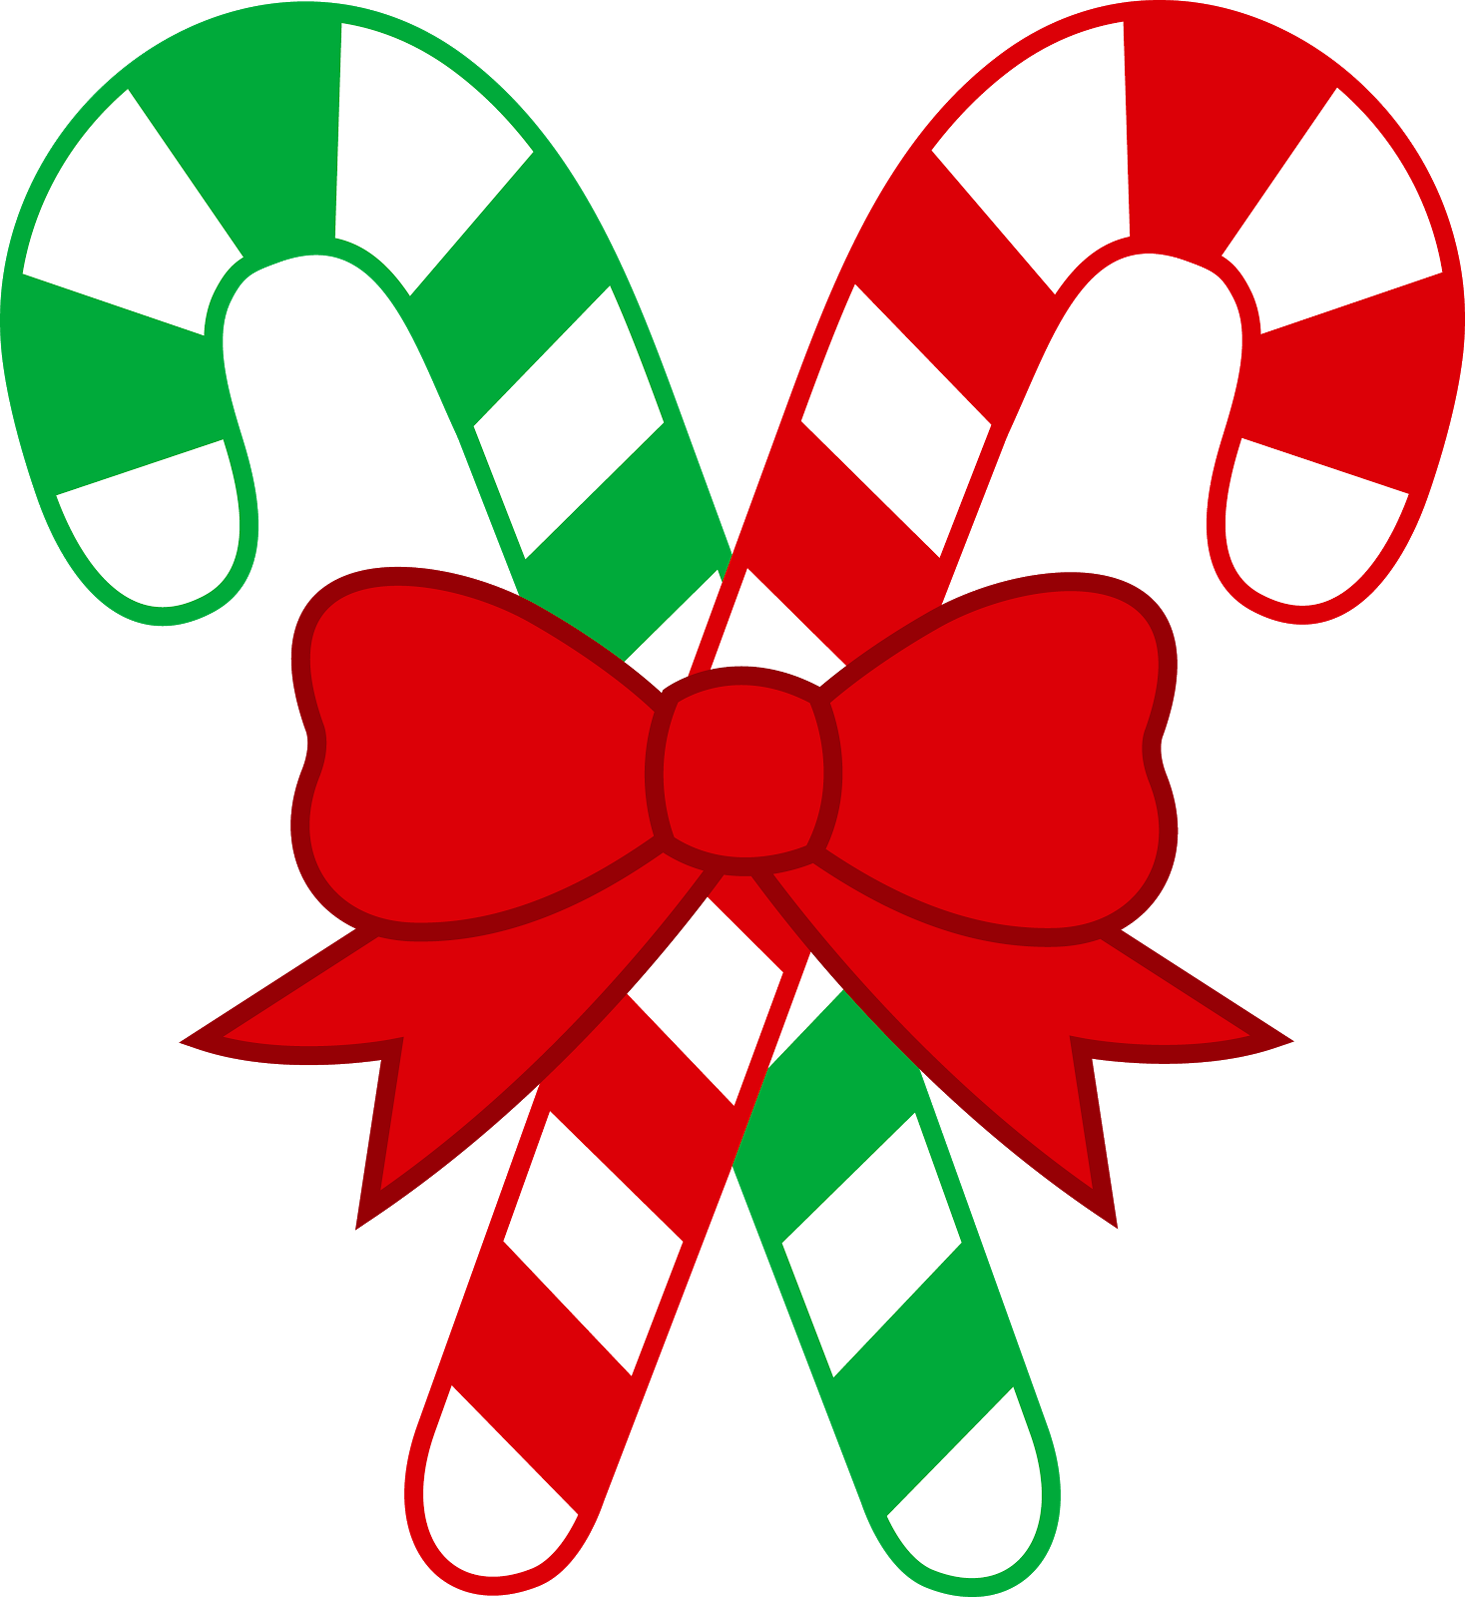 Free candy cane clipart publi - Clipart Candy Cane